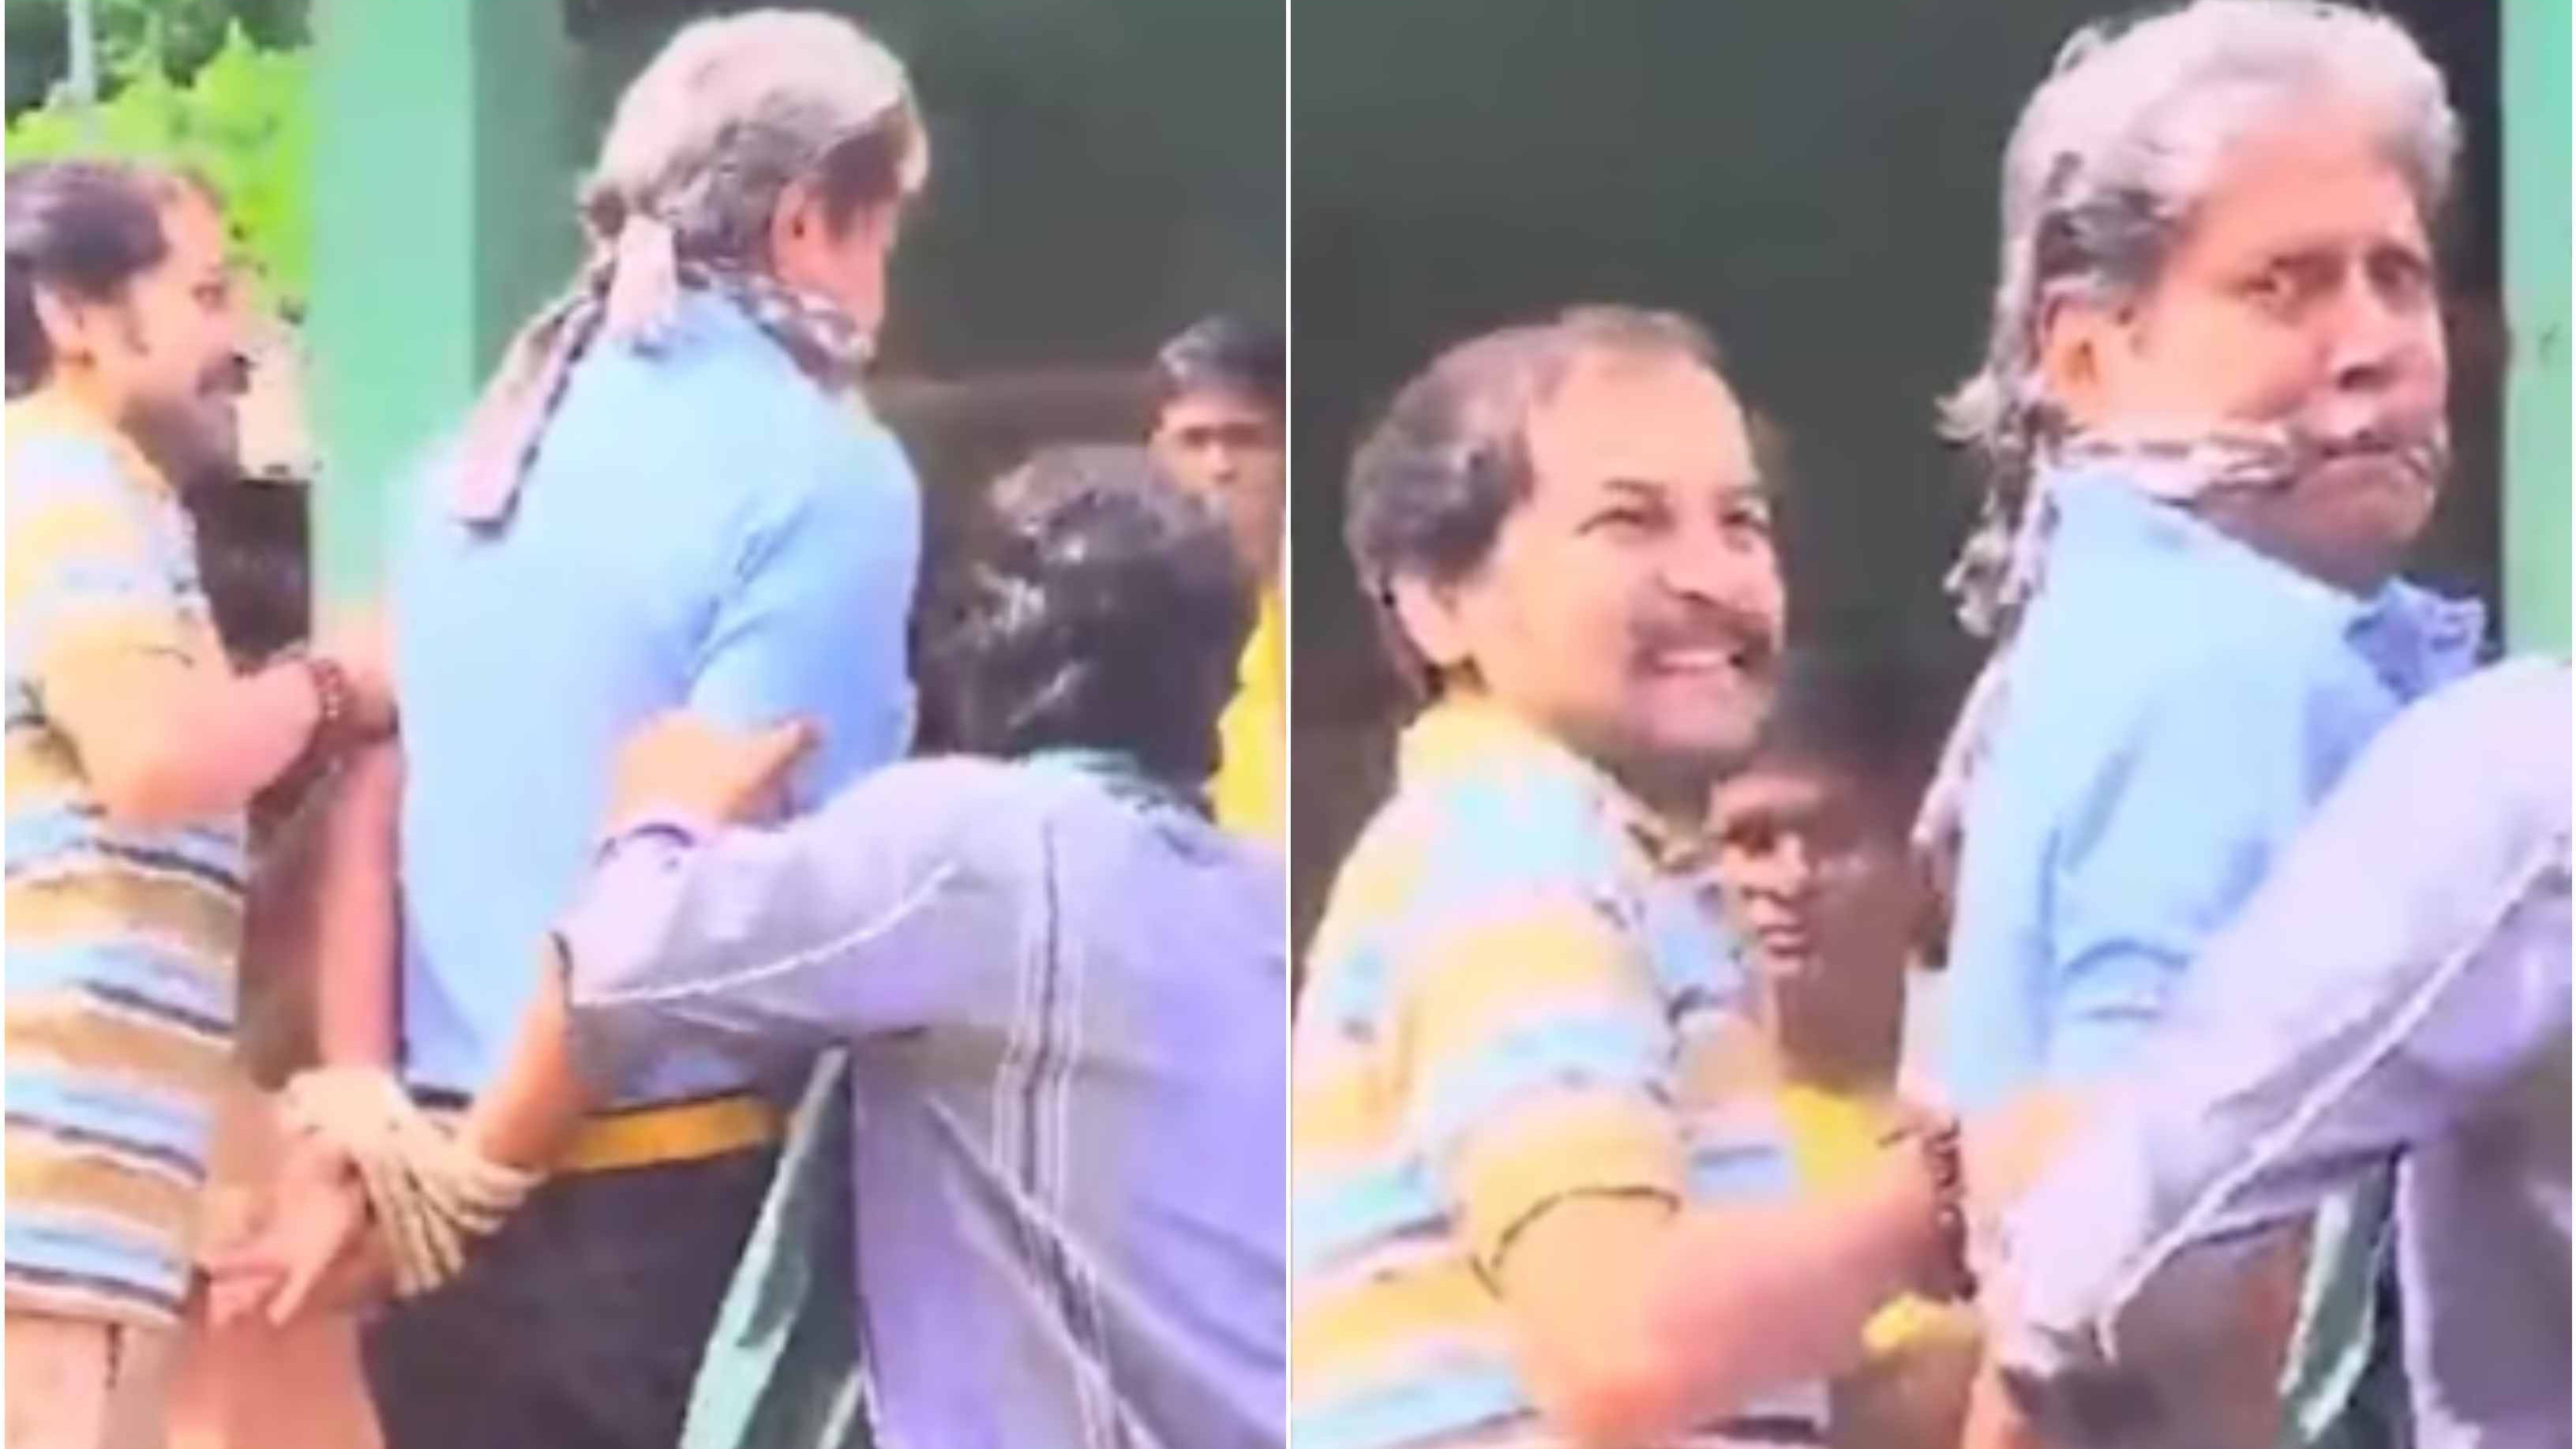 WATCH: Viral video shows Kapil Dev getting kidnapped by goons, fans expresses concerns